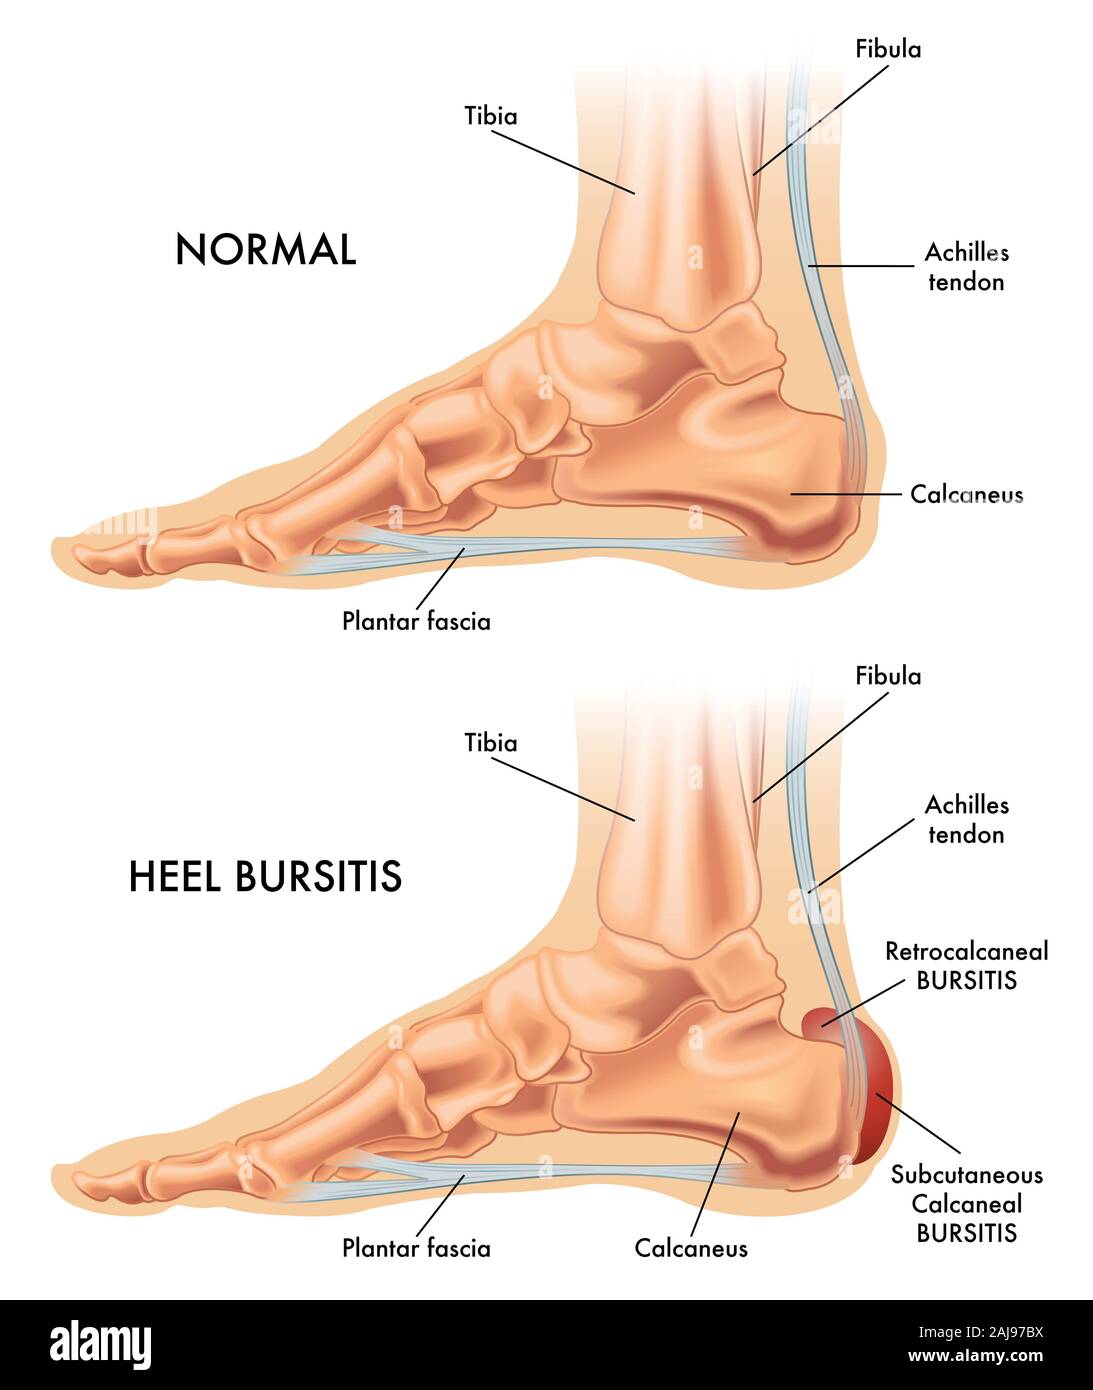 A medical illustration of a healthy foot and a foot affected by heel bursitis. Stock Photo